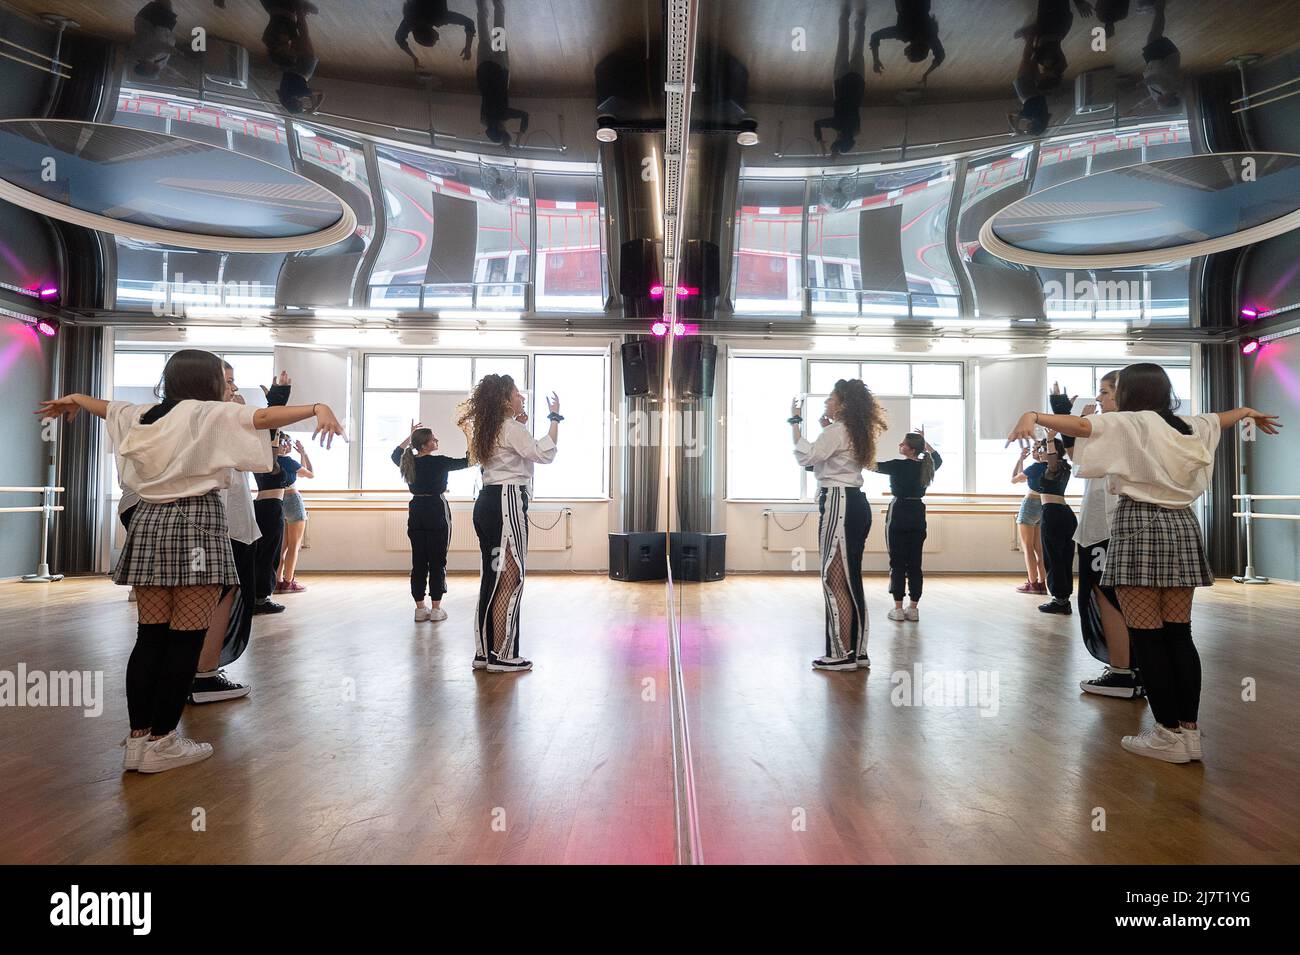 10 May 2022, Hessen, Frankfurt/Main: Dance teacher Samira (M) shows a step  in a choreography in front of a mirror during a K-pop dance class. K-Pop  refers to Korean-language pop music. On